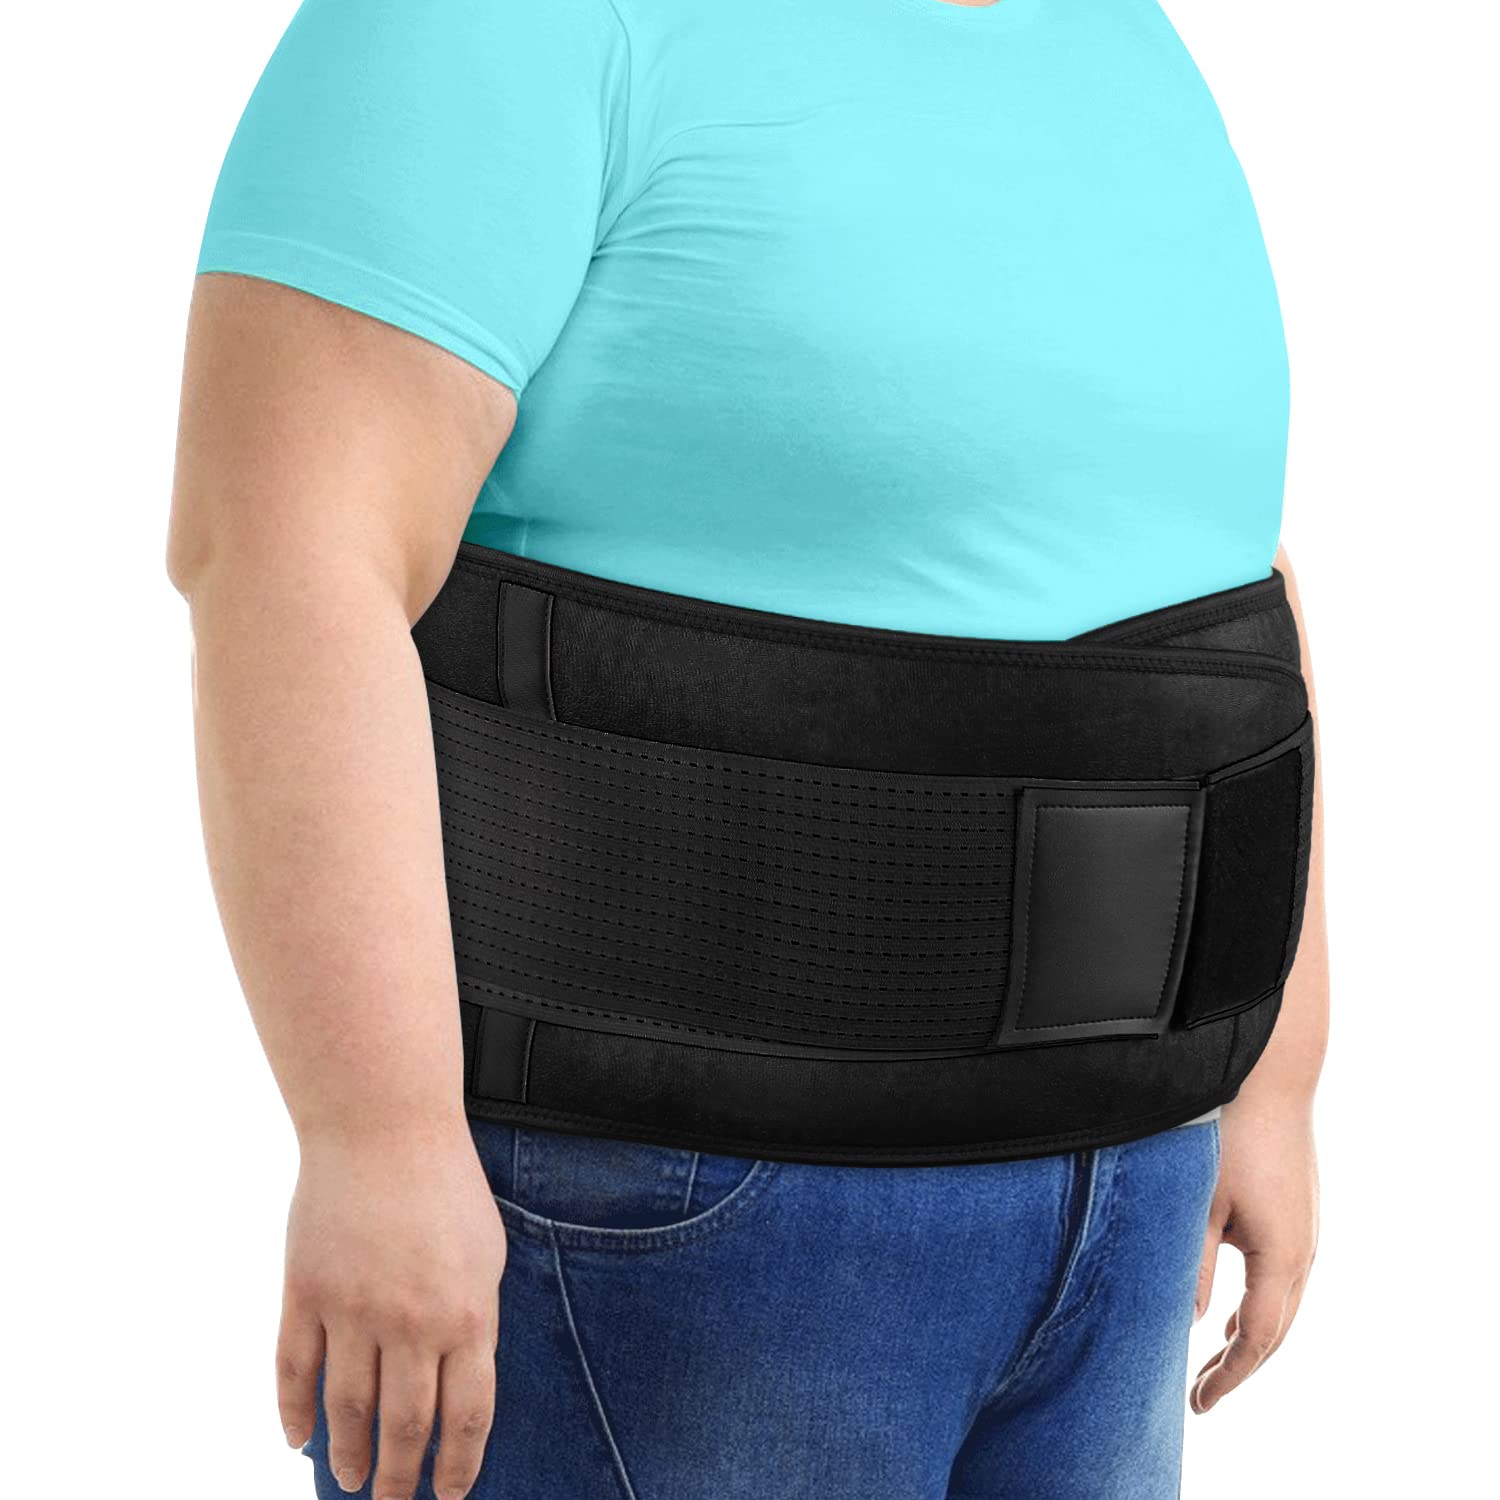 Back Brace Lumbar Support Belt - Relief Back Pain, Sciatica, Herniated Disc,  Scoliosis and More - Back Support